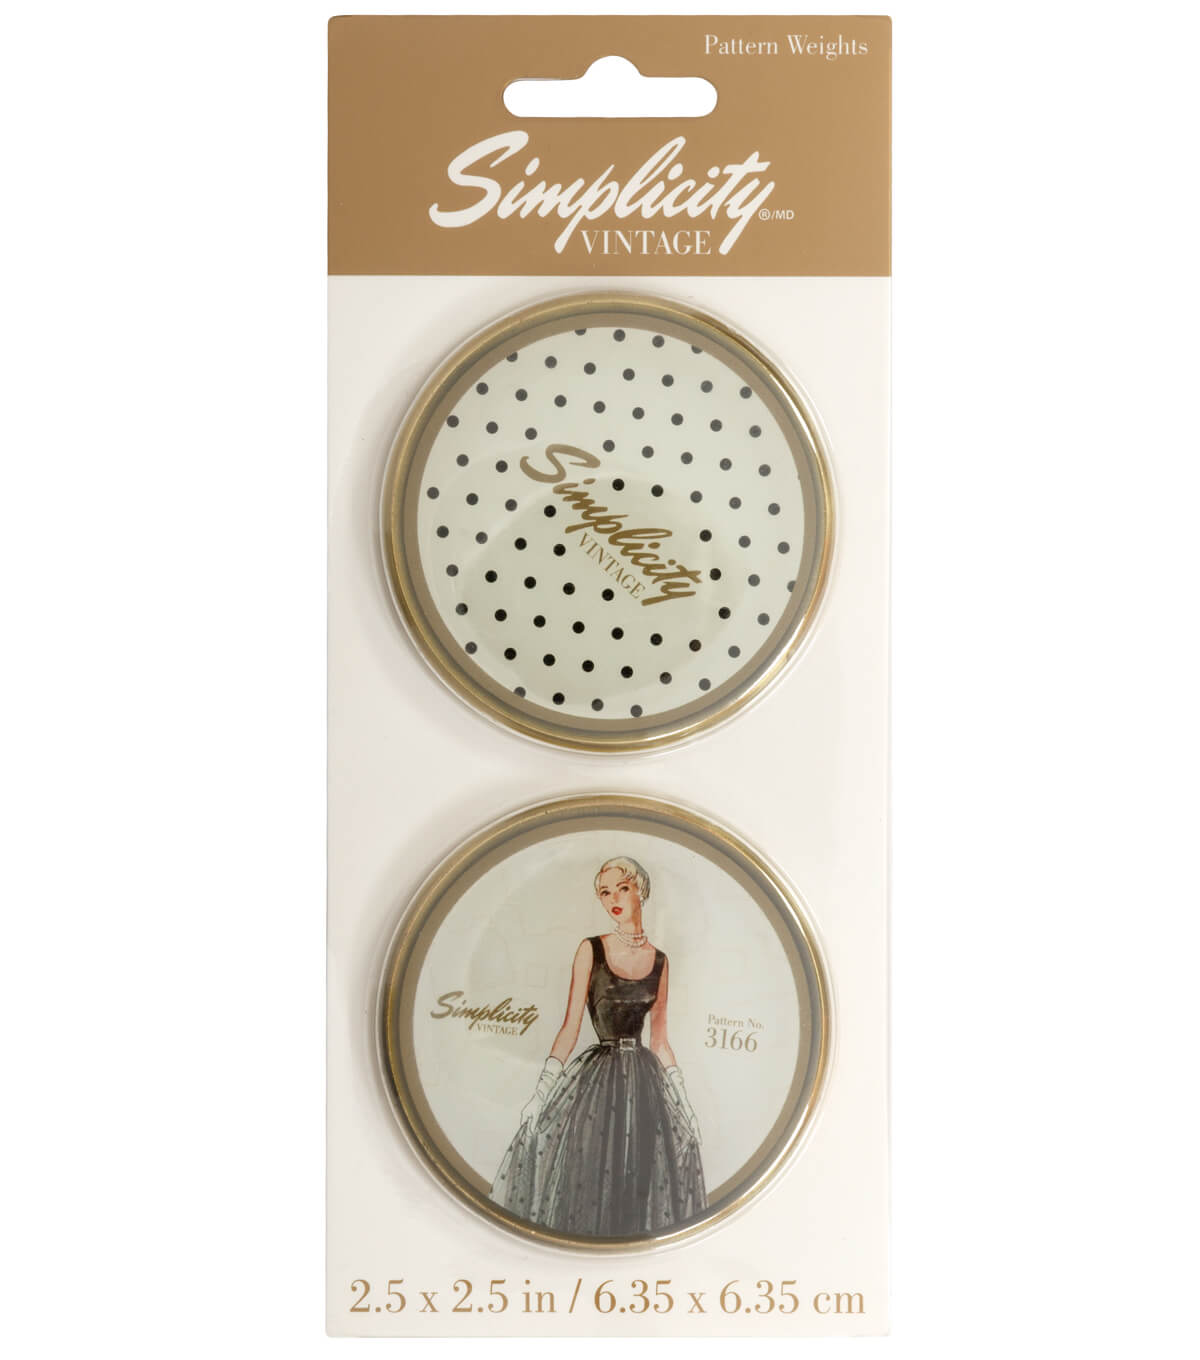 SIMPLICITY VINTAGE - PATTERN / PAPER WEIGHTS - SPOTS